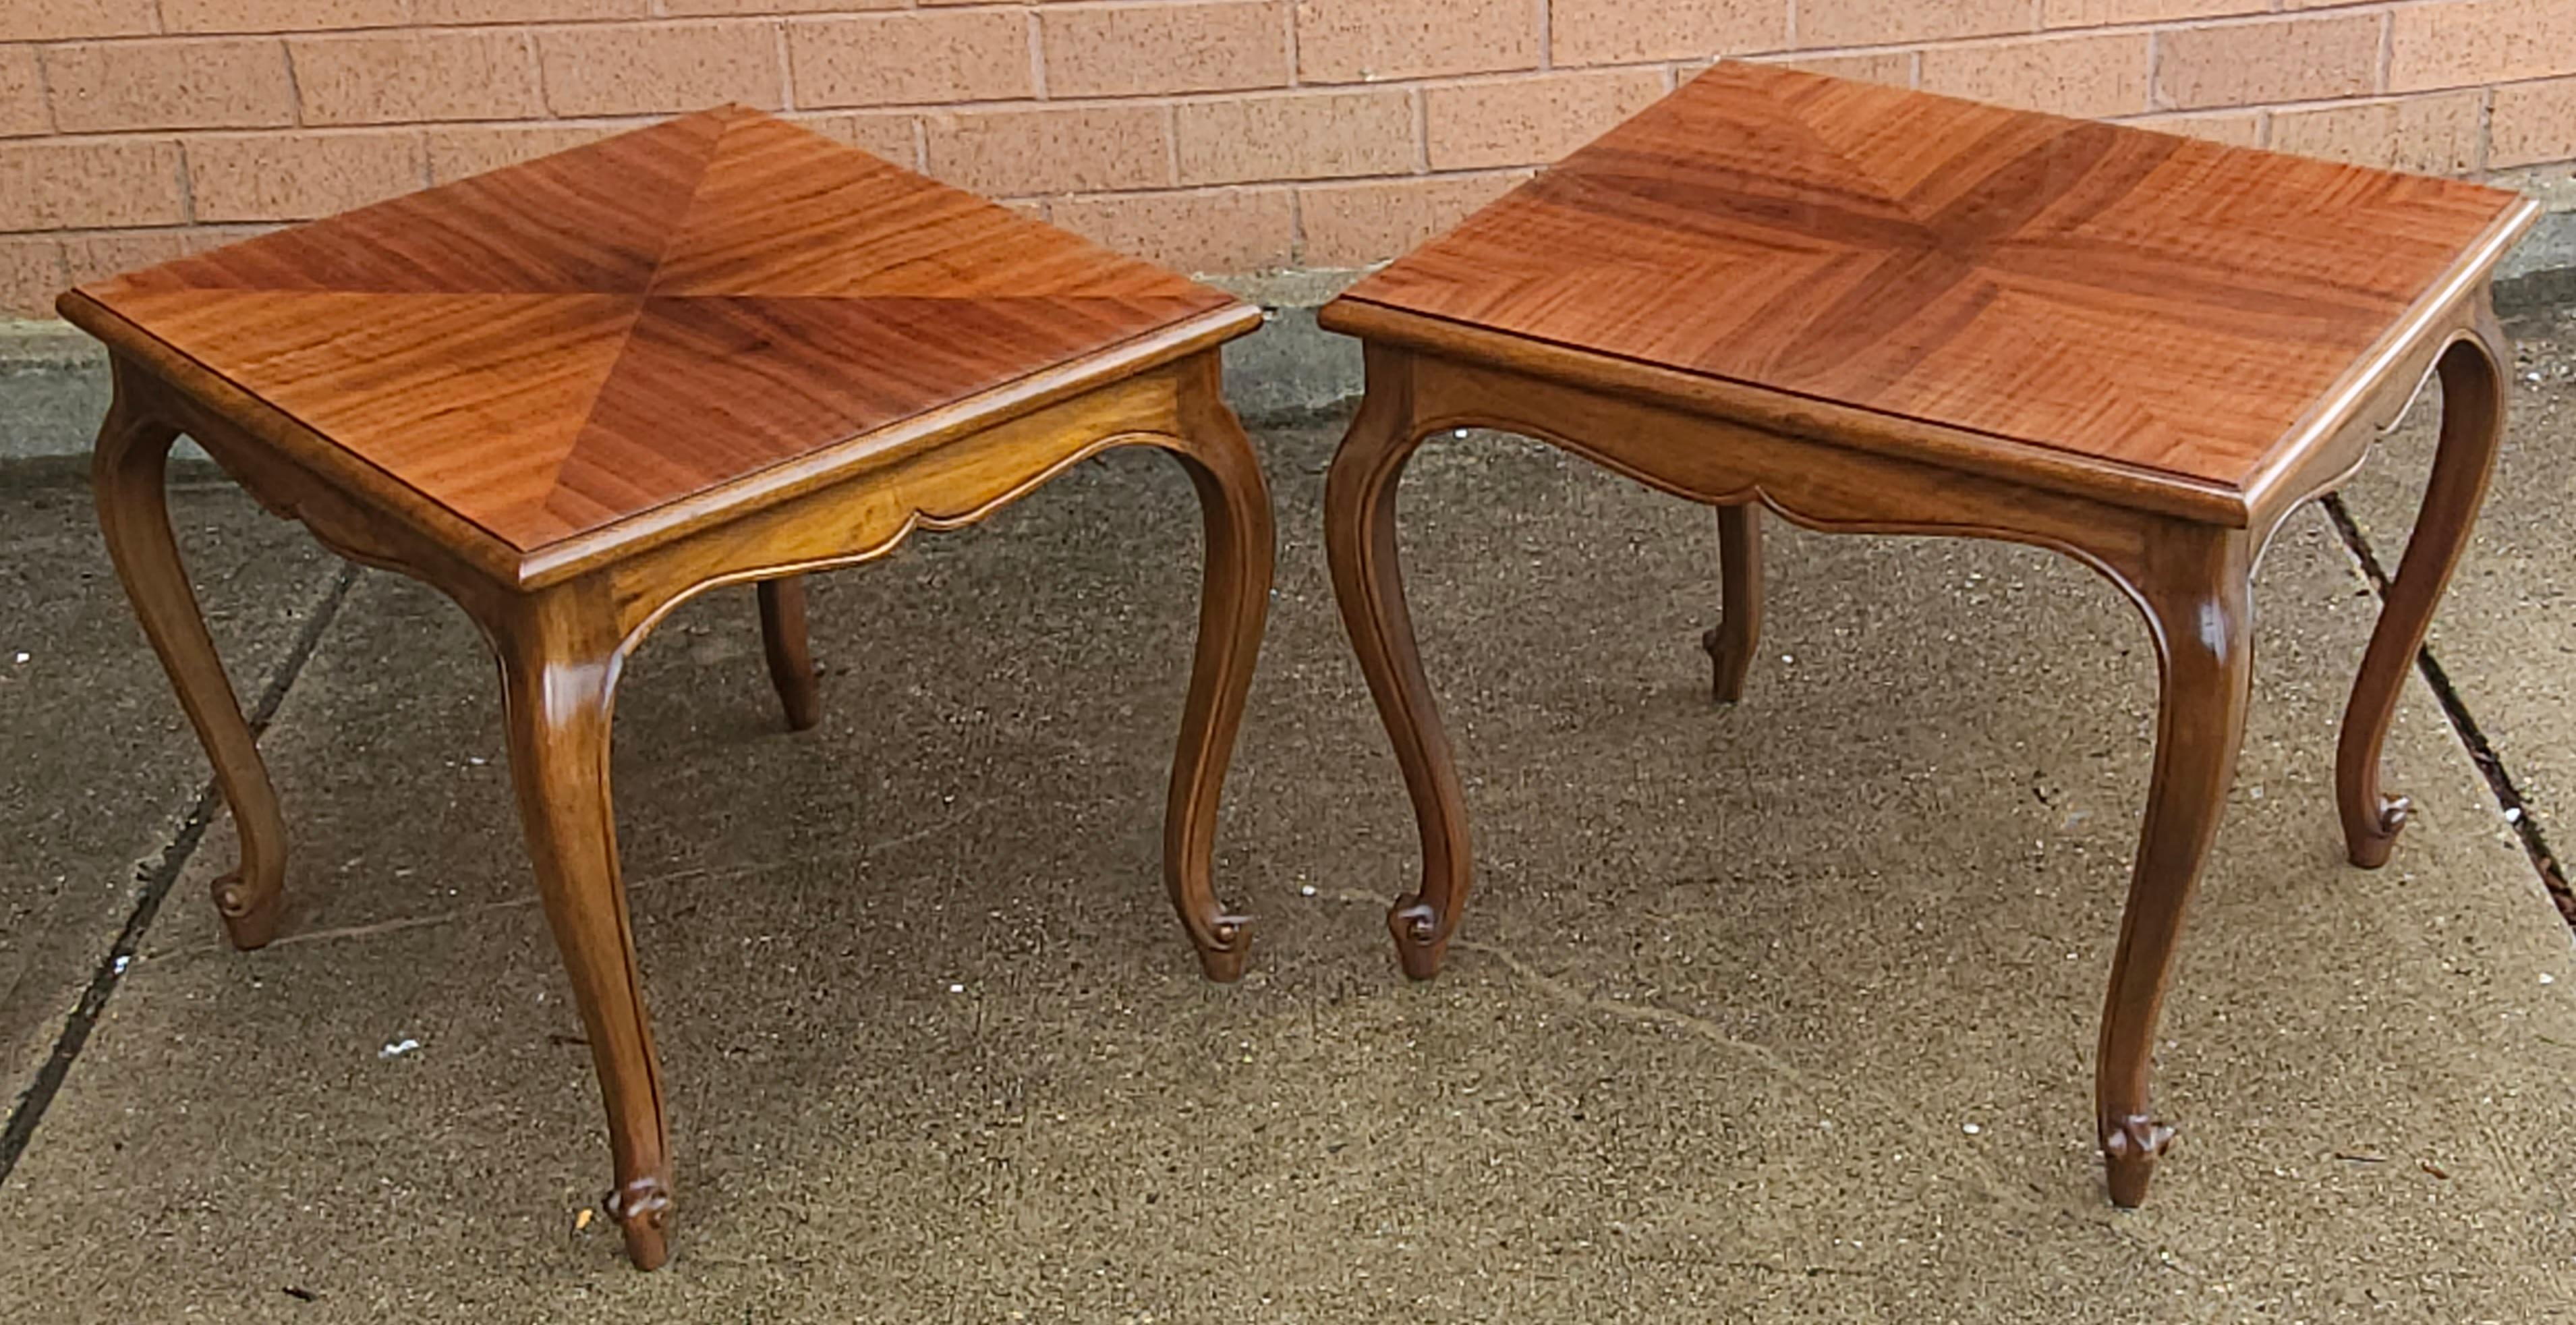 French Provincial 20th C. Handcrafted Bookmatched Brazilian Rosewood Provincial Side Tables, Pair For Sale